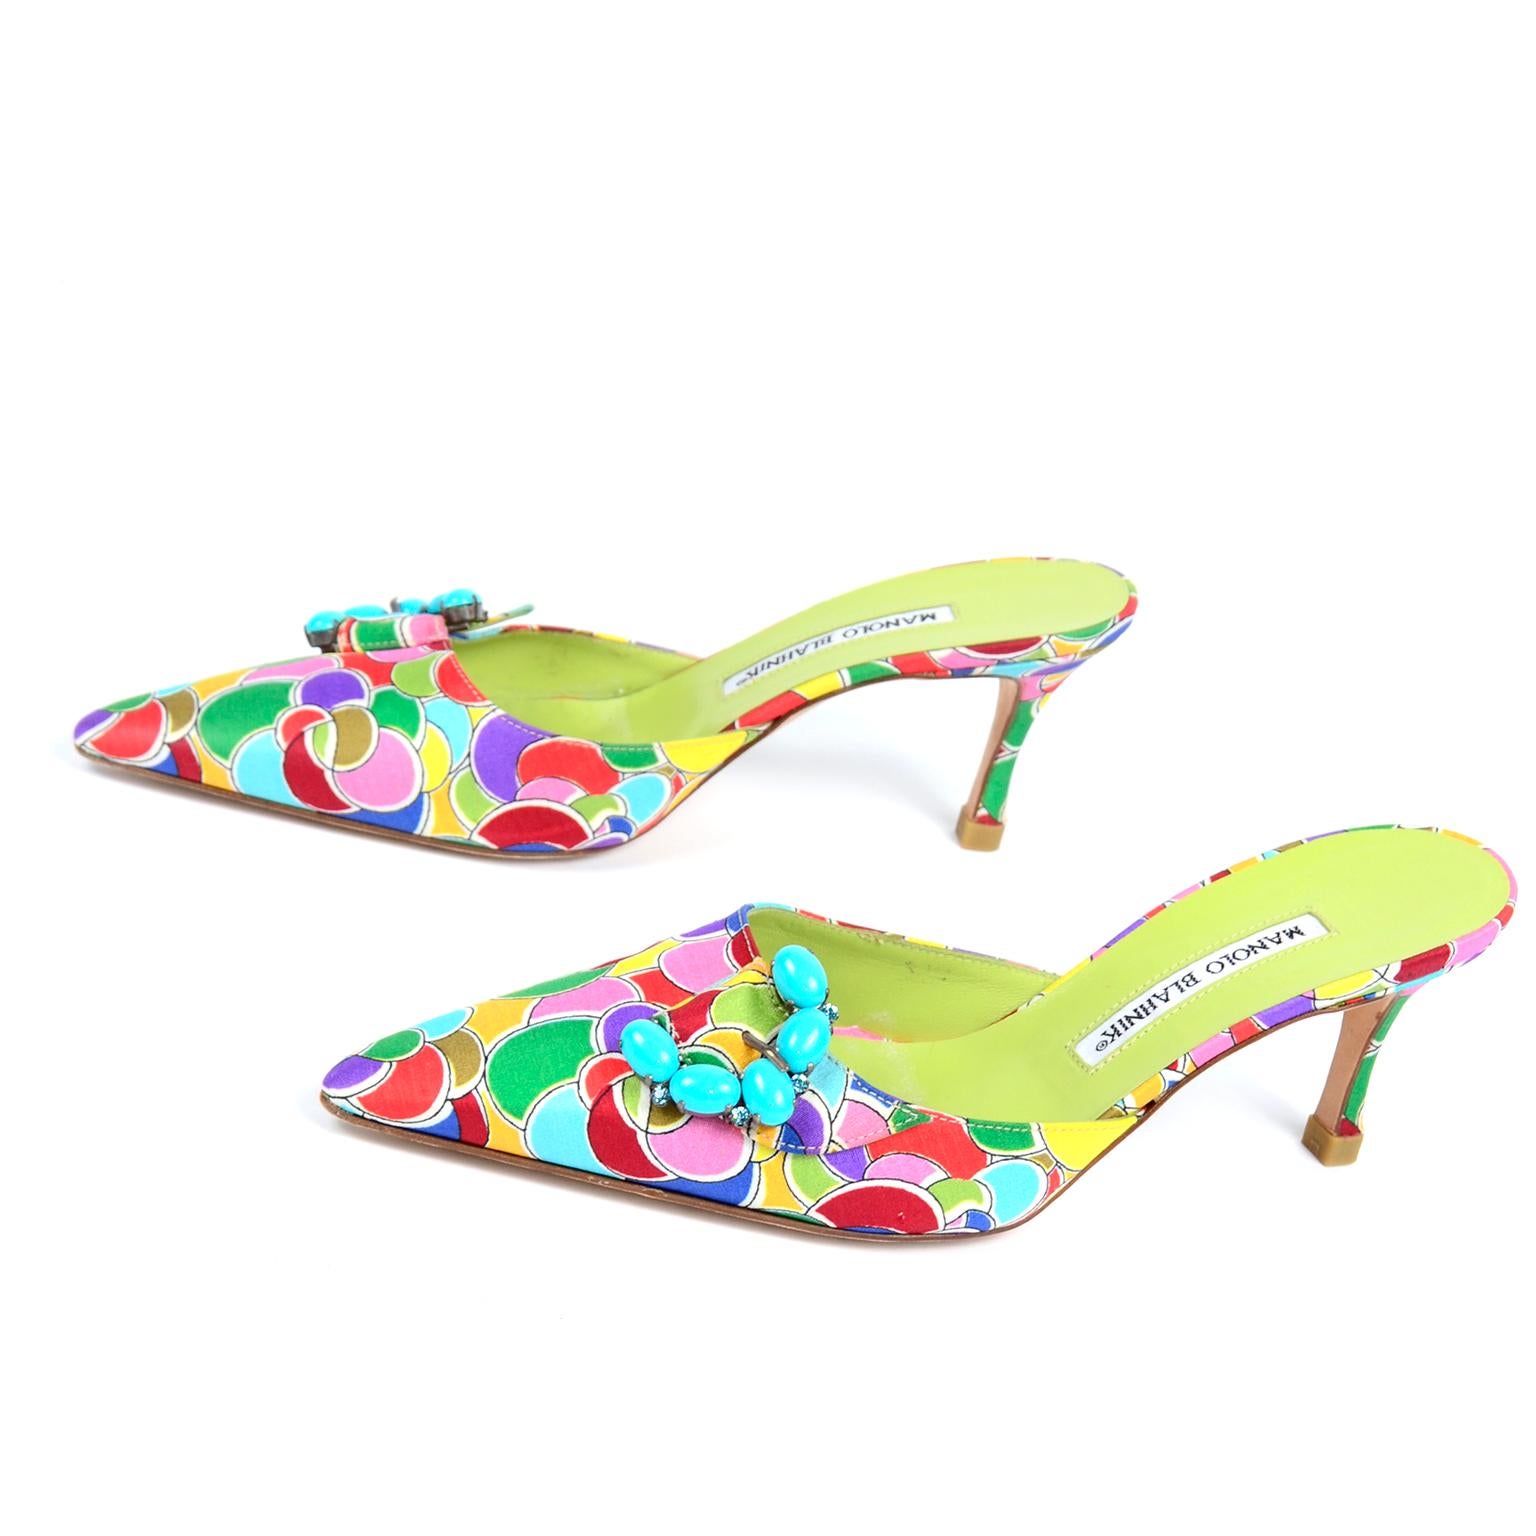 Manolo Blahnik Atomica Colorful Heeled Mules w/ Turquoise Buckle Size 36 1/2 In Excellent Condition For Sale In Portland, OR